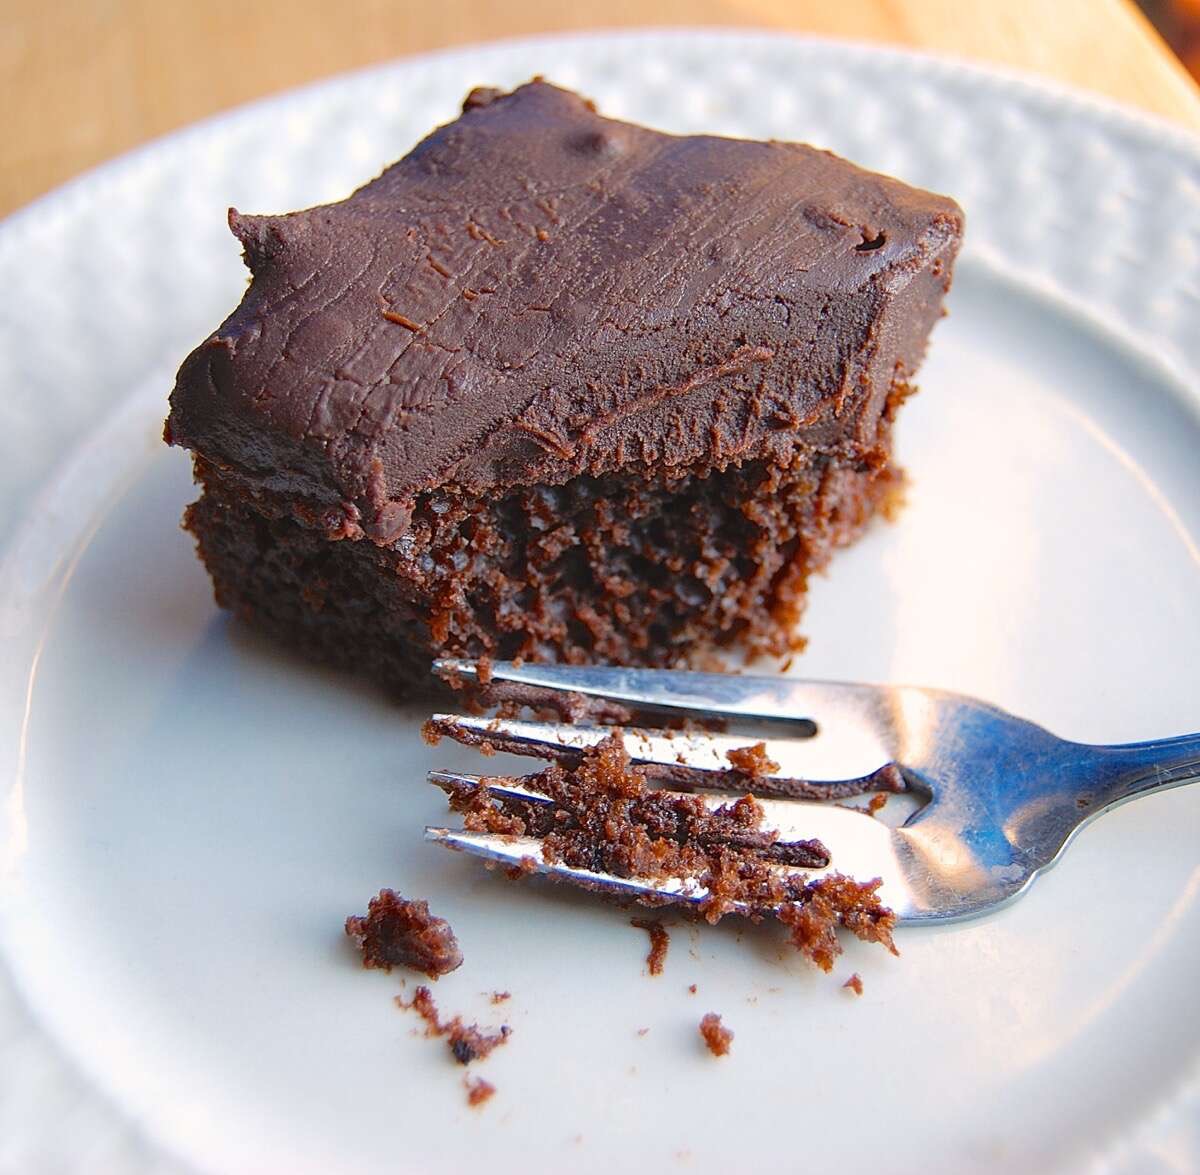 Square of chocolate cake with fudge frosting on a plate with a fork.